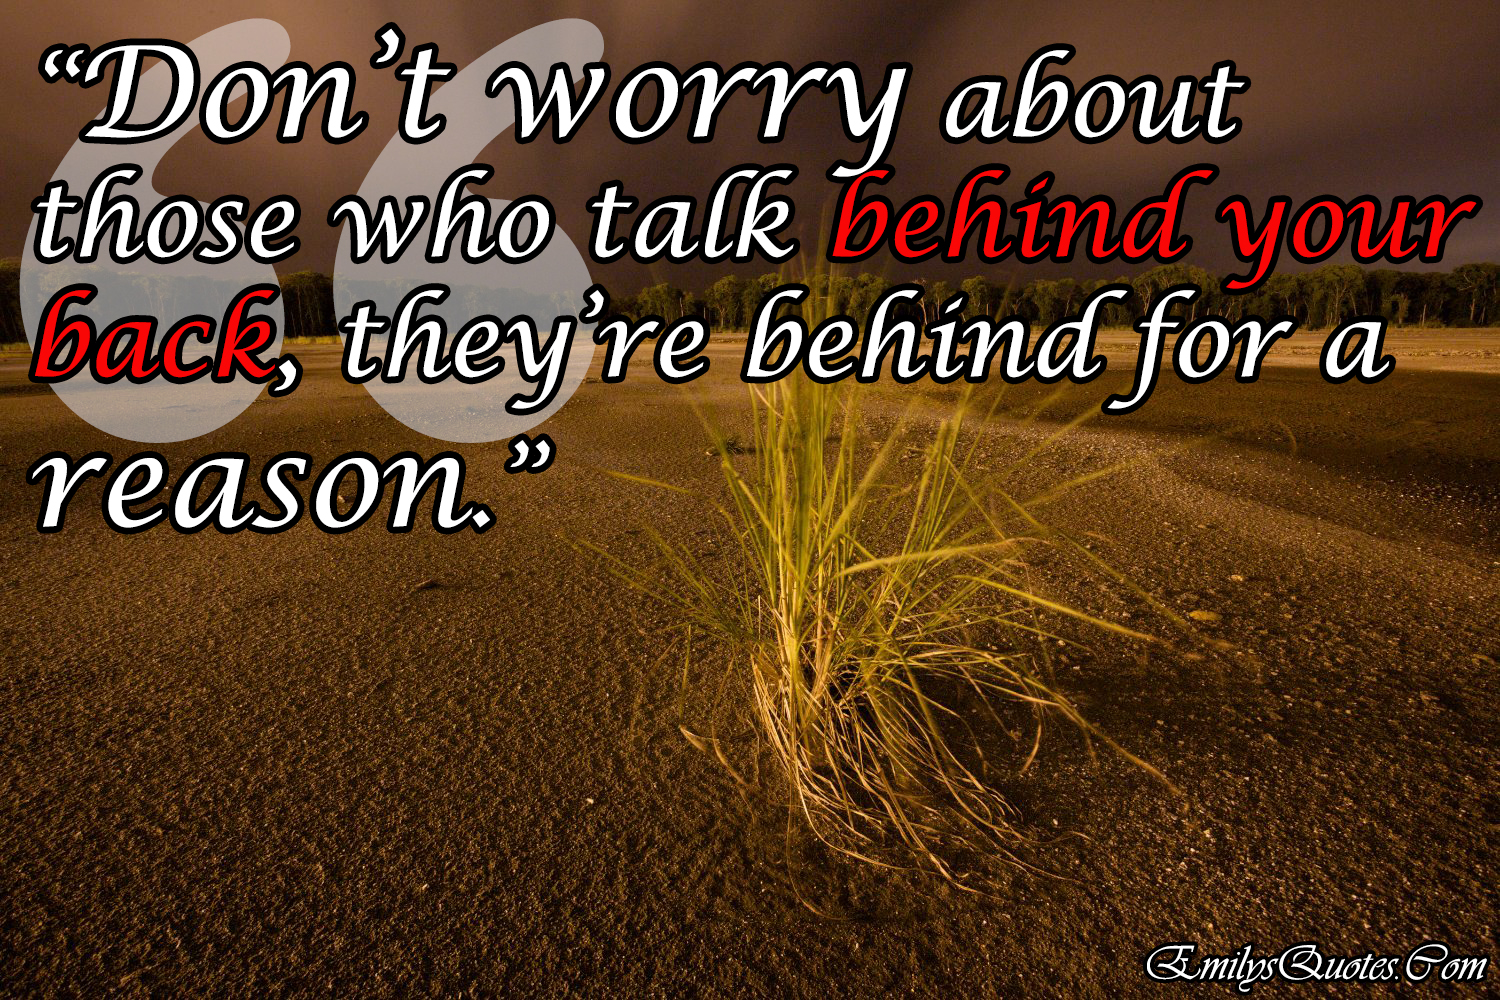 Don’t worry about those who talk behind your back, they’re behind for a reason